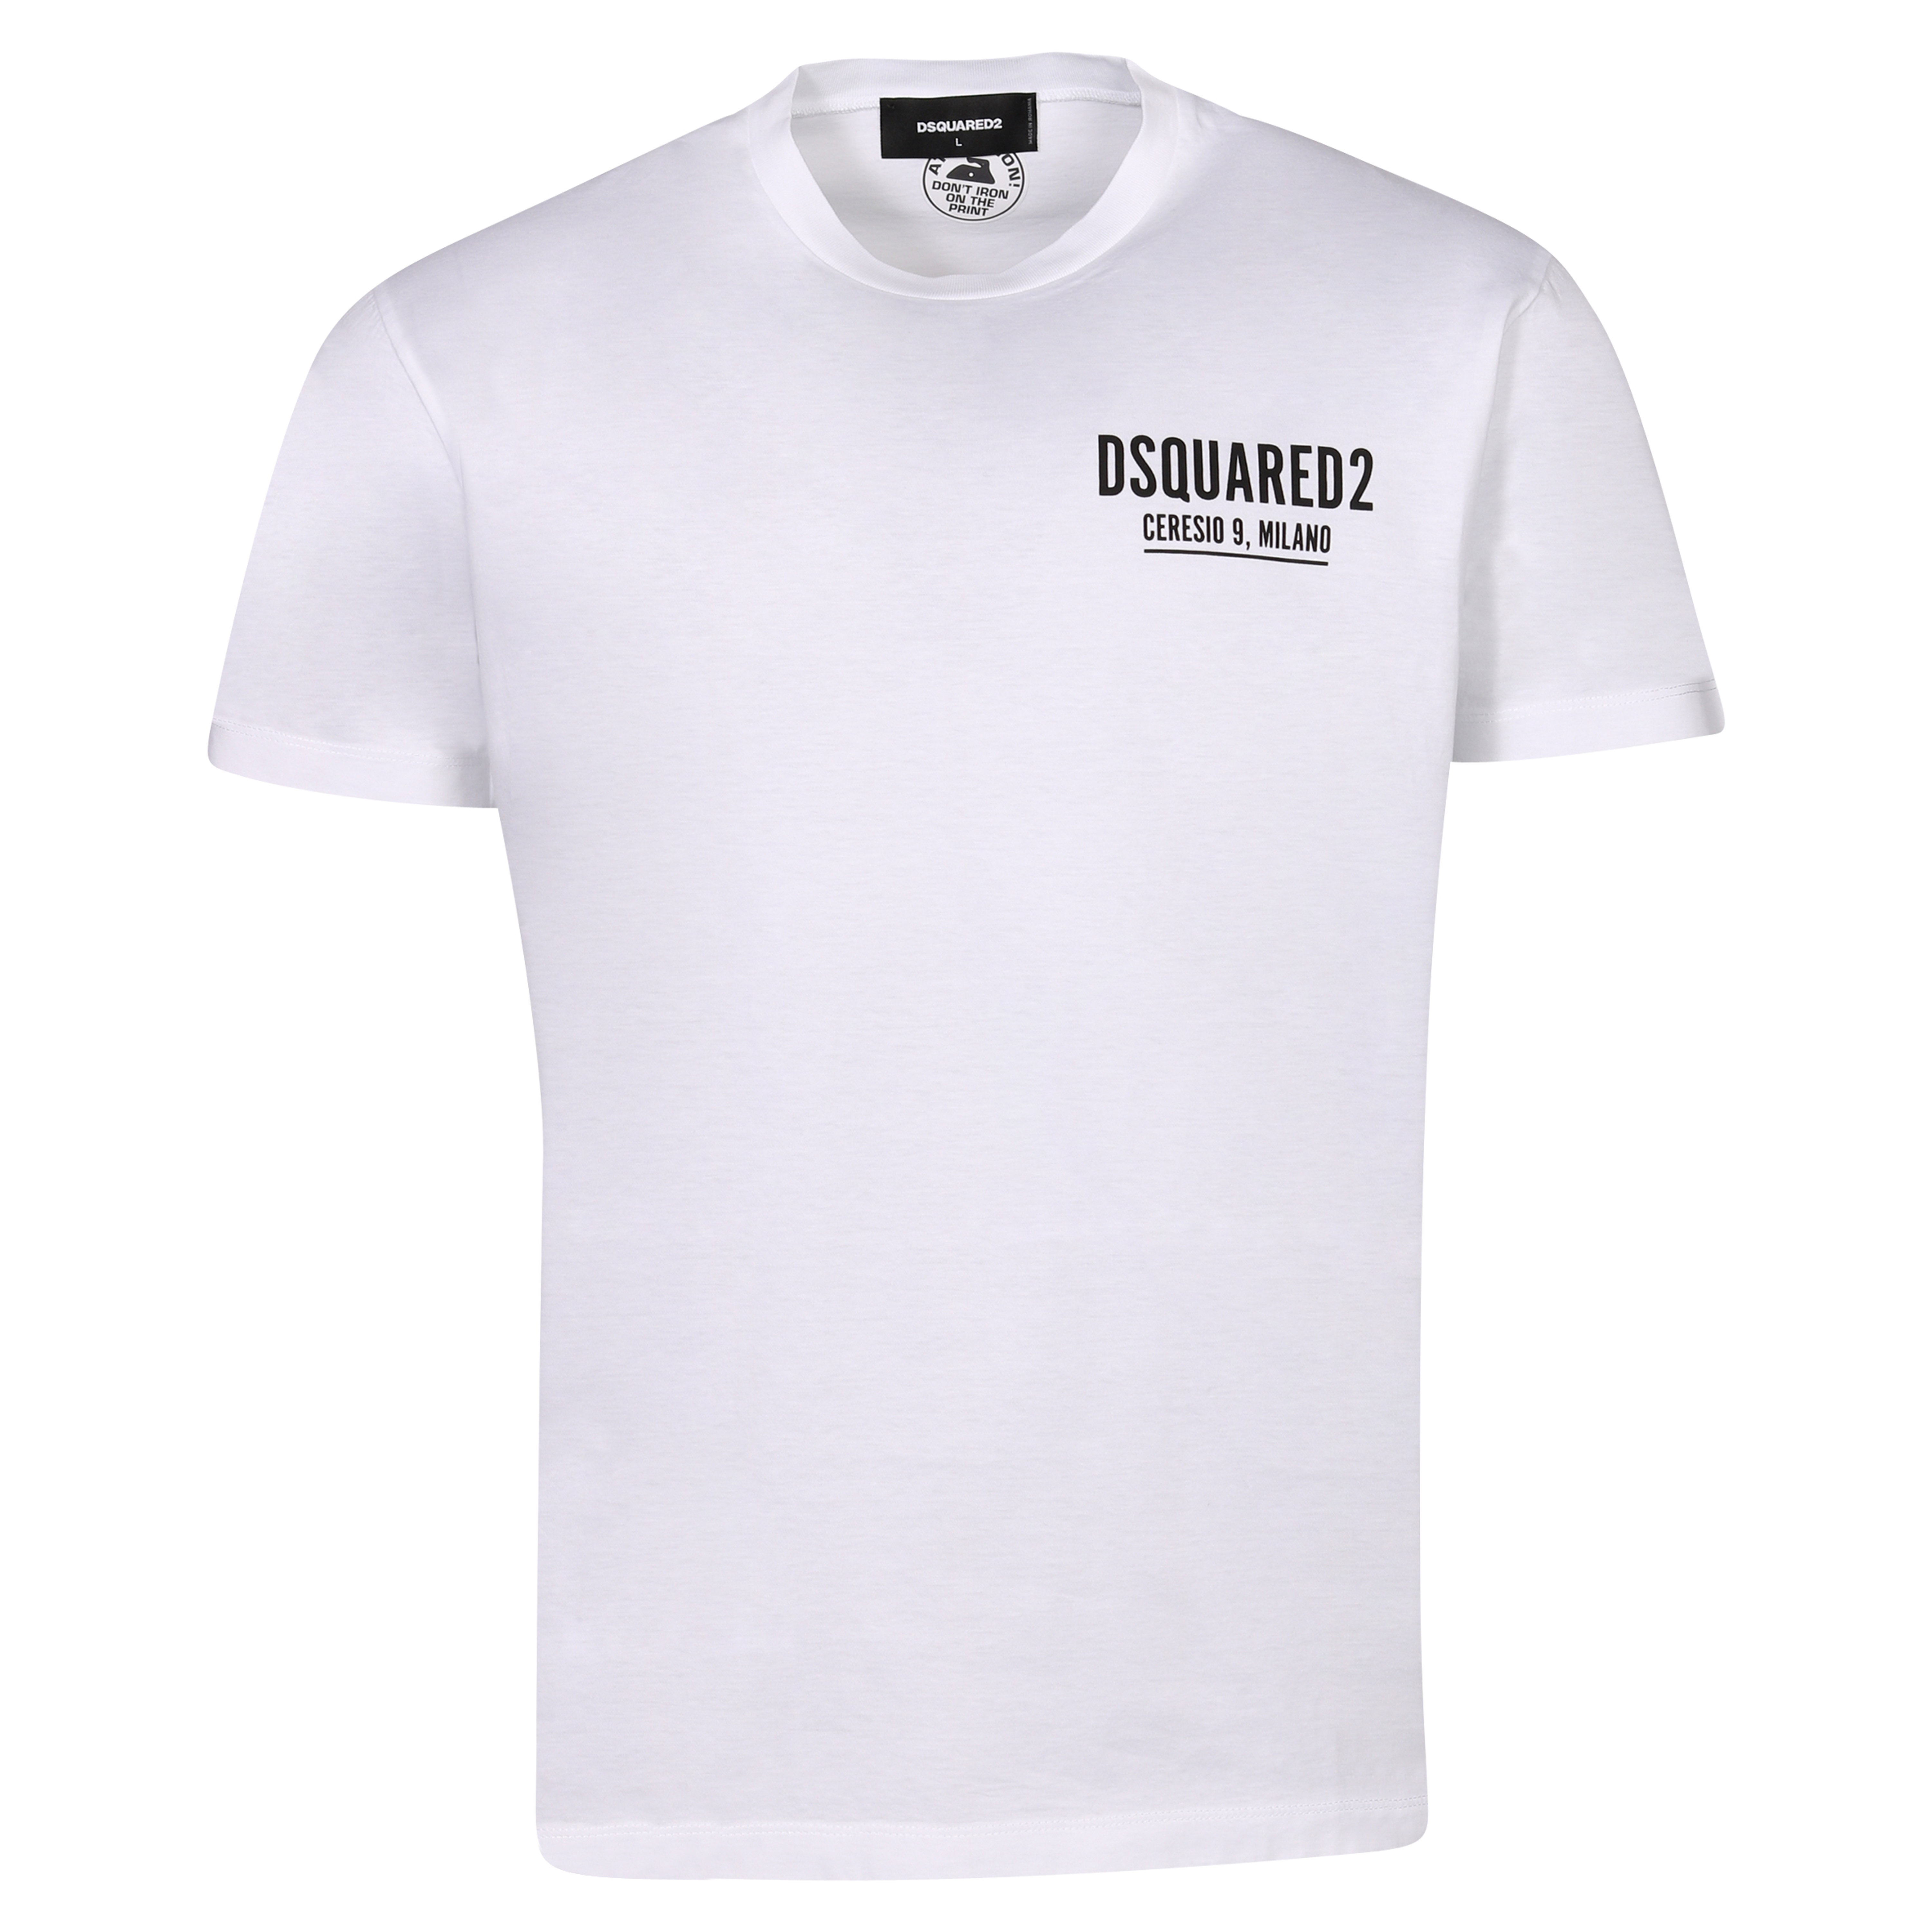 Dsquared Ceresio 9 T-Shirt in White XL